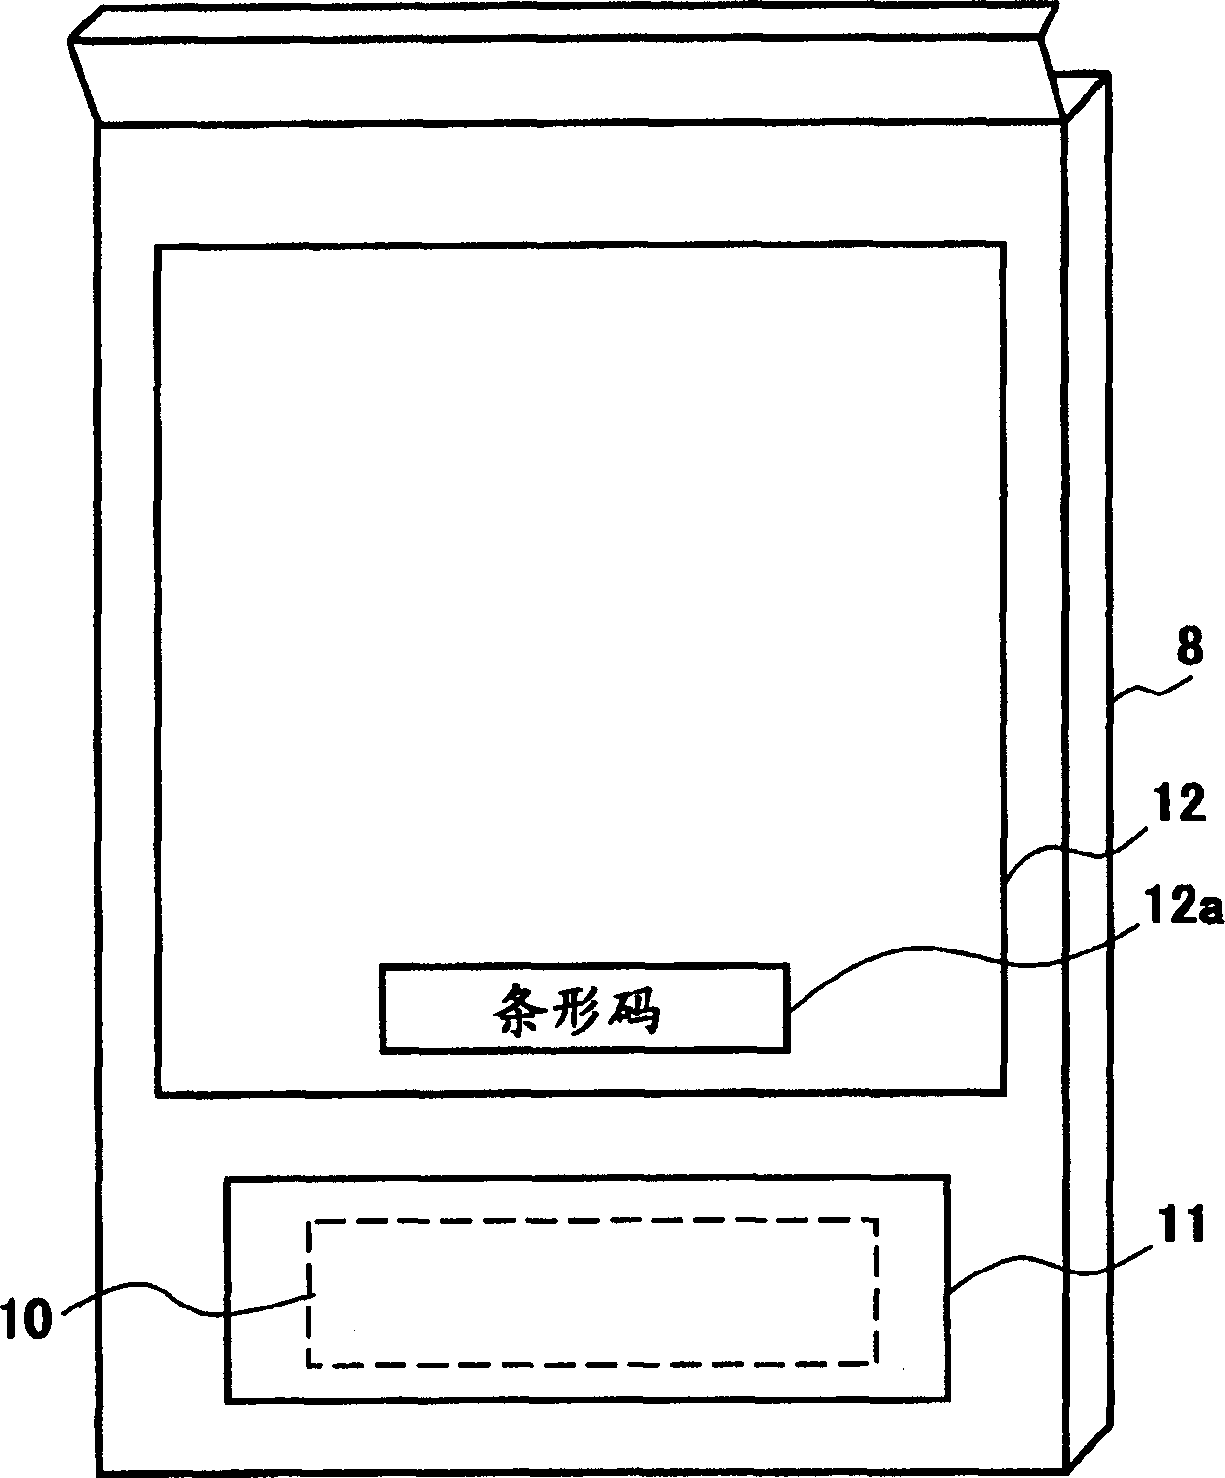 Label and RFID tag issuing apparatus